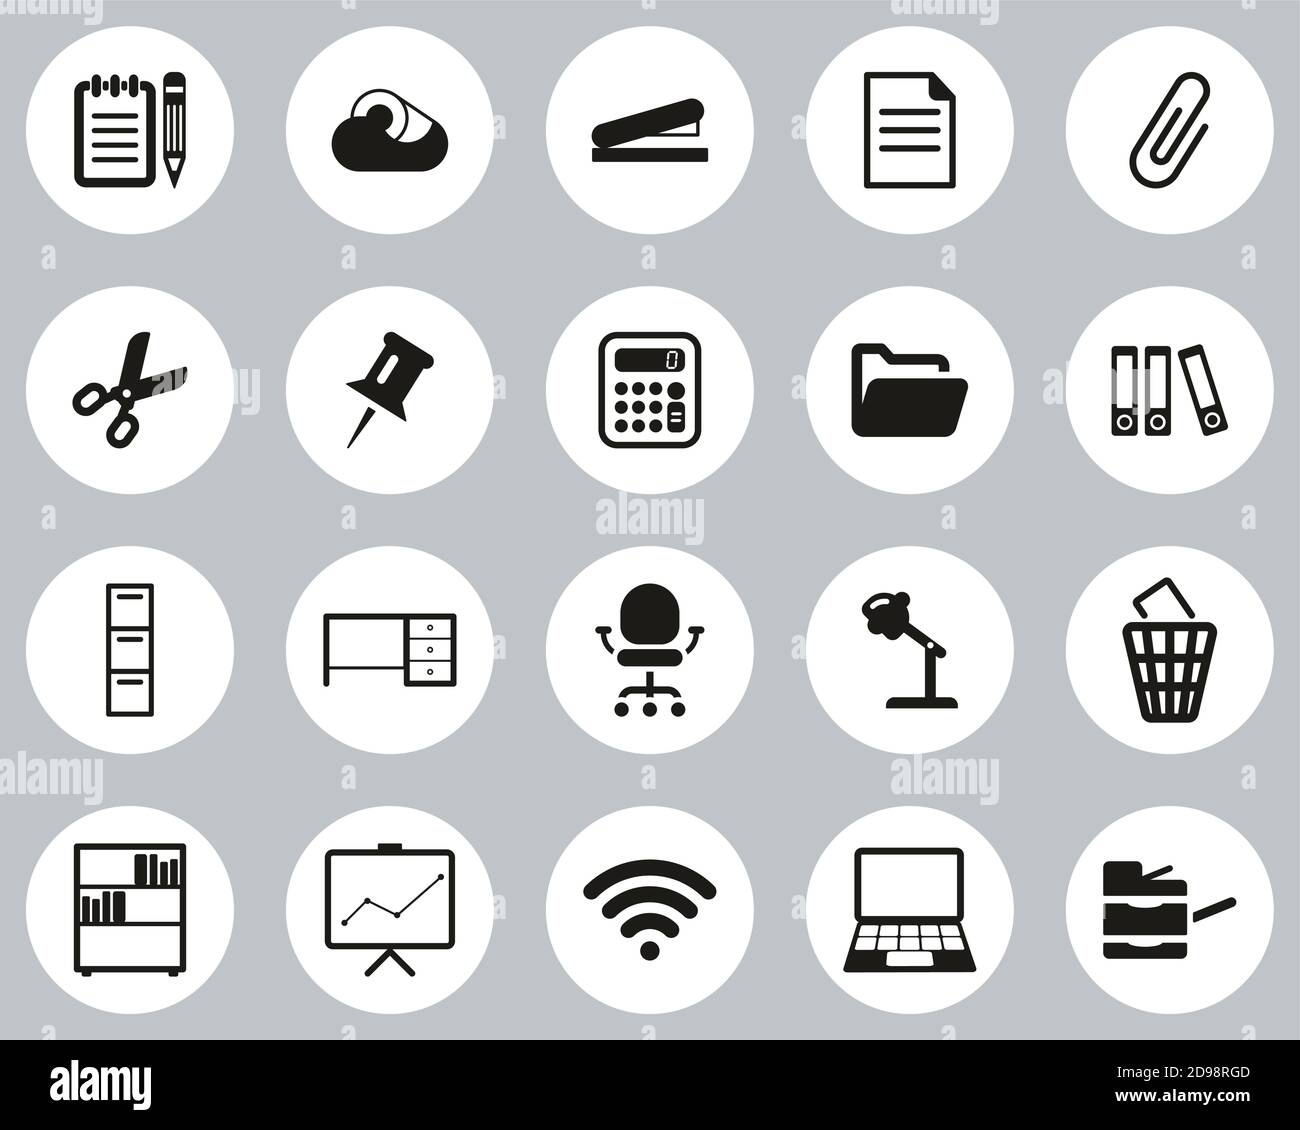 100 office supplies icons set, simple style 8658321 Vector Art at Vecteezy